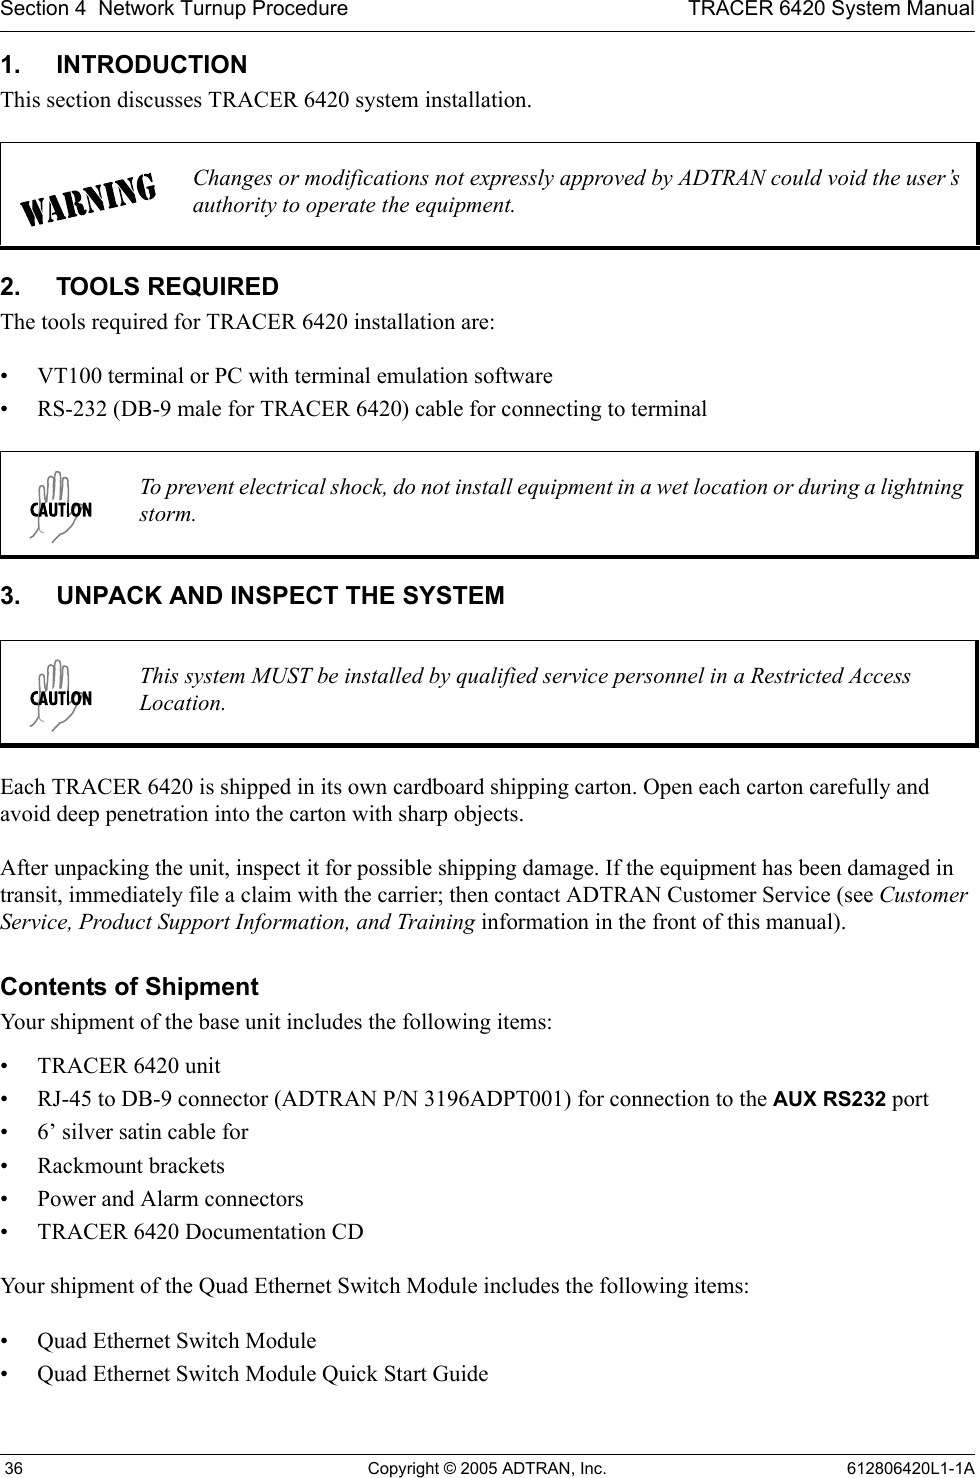 Section 4  Network Turnup Procedure TRACER 6420 System Manual 36 Copyright © 2005 ADTRAN, Inc. 612806420L1-1A1. INTRODUCTIONThis section discusses TRACER 6420 system installation.2. TOOLS REQUIREDThe tools required for TRACER 6420 installation are:• VT100 terminal or PC with terminal emulation software• RS-232 (DB-9 male for TRACER 6420) cable for connecting to terminal3. UNPACK AND INSPECT THE SYSTEMEach TRACER 6420 is shipped in its own cardboard shipping carton. Open each carton carefully and avoid deep penetration into the carton with sharp objects. After unpacking the unit, inspect it for possible shipping damage. If the equipment has been damaged in transit, immediately file a claim with the carrier; then contact ADTRAN Customer Service (see Customer Service, Product Support Information, and Training information in the front of this manual).Contents of ShipmentYour shipment of the base unit includes the following items:• TRACER 6420 unit• RJ-45 to DB-9 connector (ADTRAN P/N 3196ADPT001) for connection to the AUX RS232 port• 6’ silver satin cable for • Rackmount brackets• Power and Alarm connectors• TRACER 6420 Documentation CDYour shipment of the Quad Ethernet Switch Module includes the following items:• Quad Ethernet Switch Module• Quad Ethernet Switch Module Quick Start GuideChanges or modifications not expressly approved by ADTRAN could void the user’s authority to operate the equipment.To prevent electrical shock, do not install equipment in a wet location or during a lightning storm.This system MUST be installed by qualified service personnel in a Restricted Access Location.